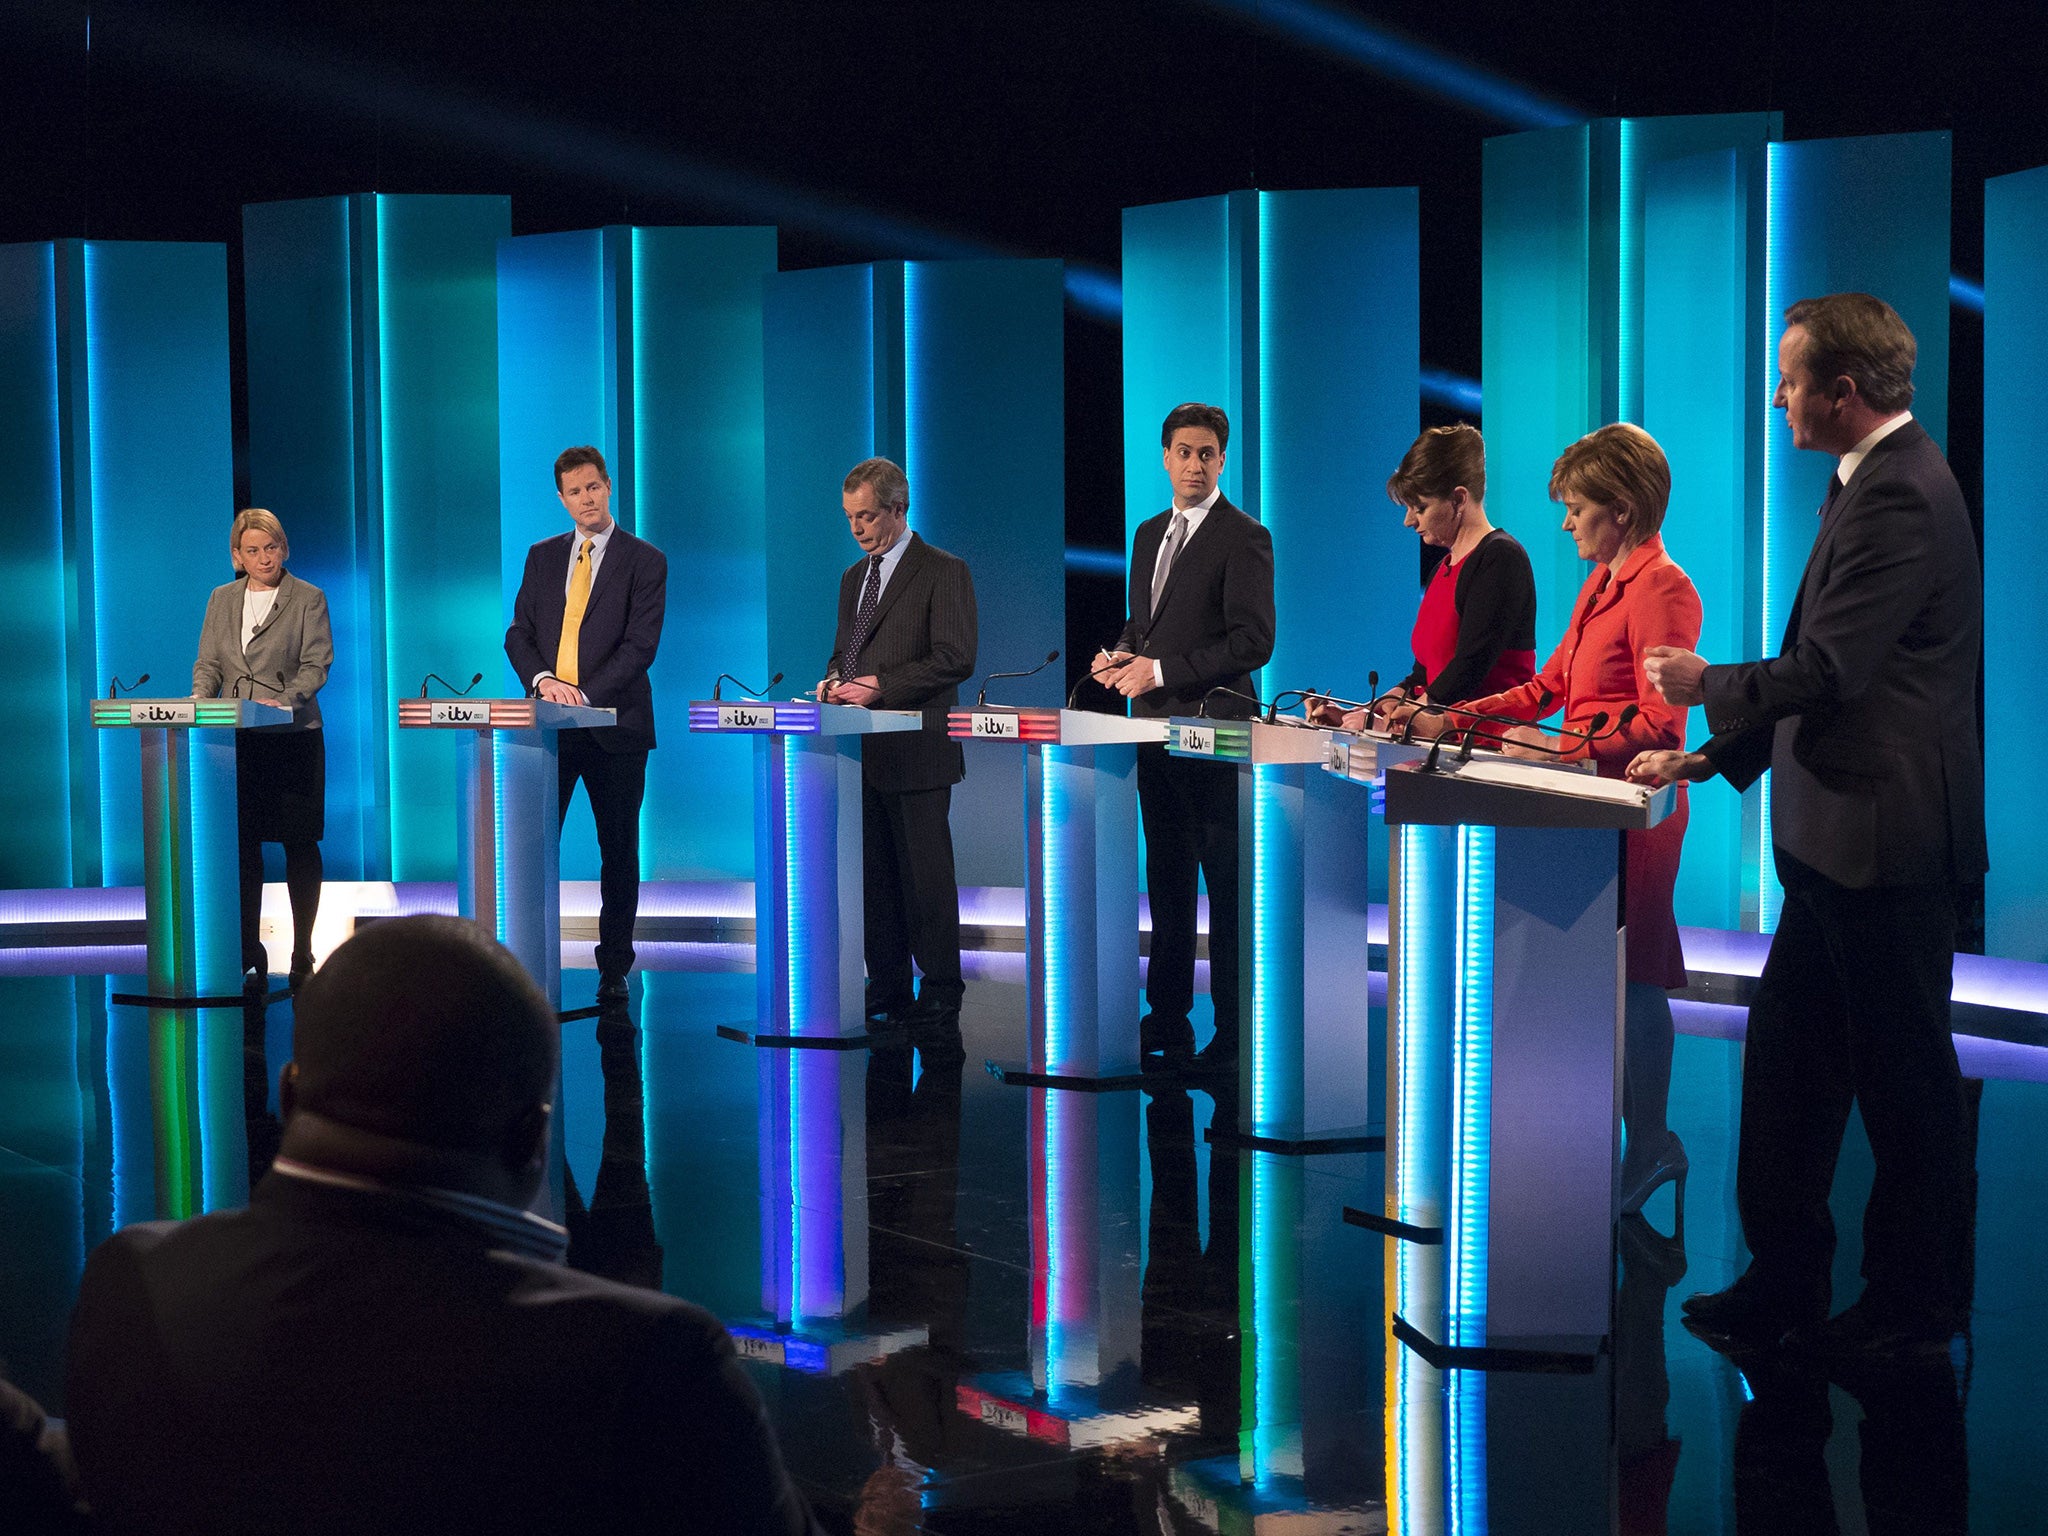 Of the seven party leaders significant enough to appear in the televised debate on 2 April, three were women